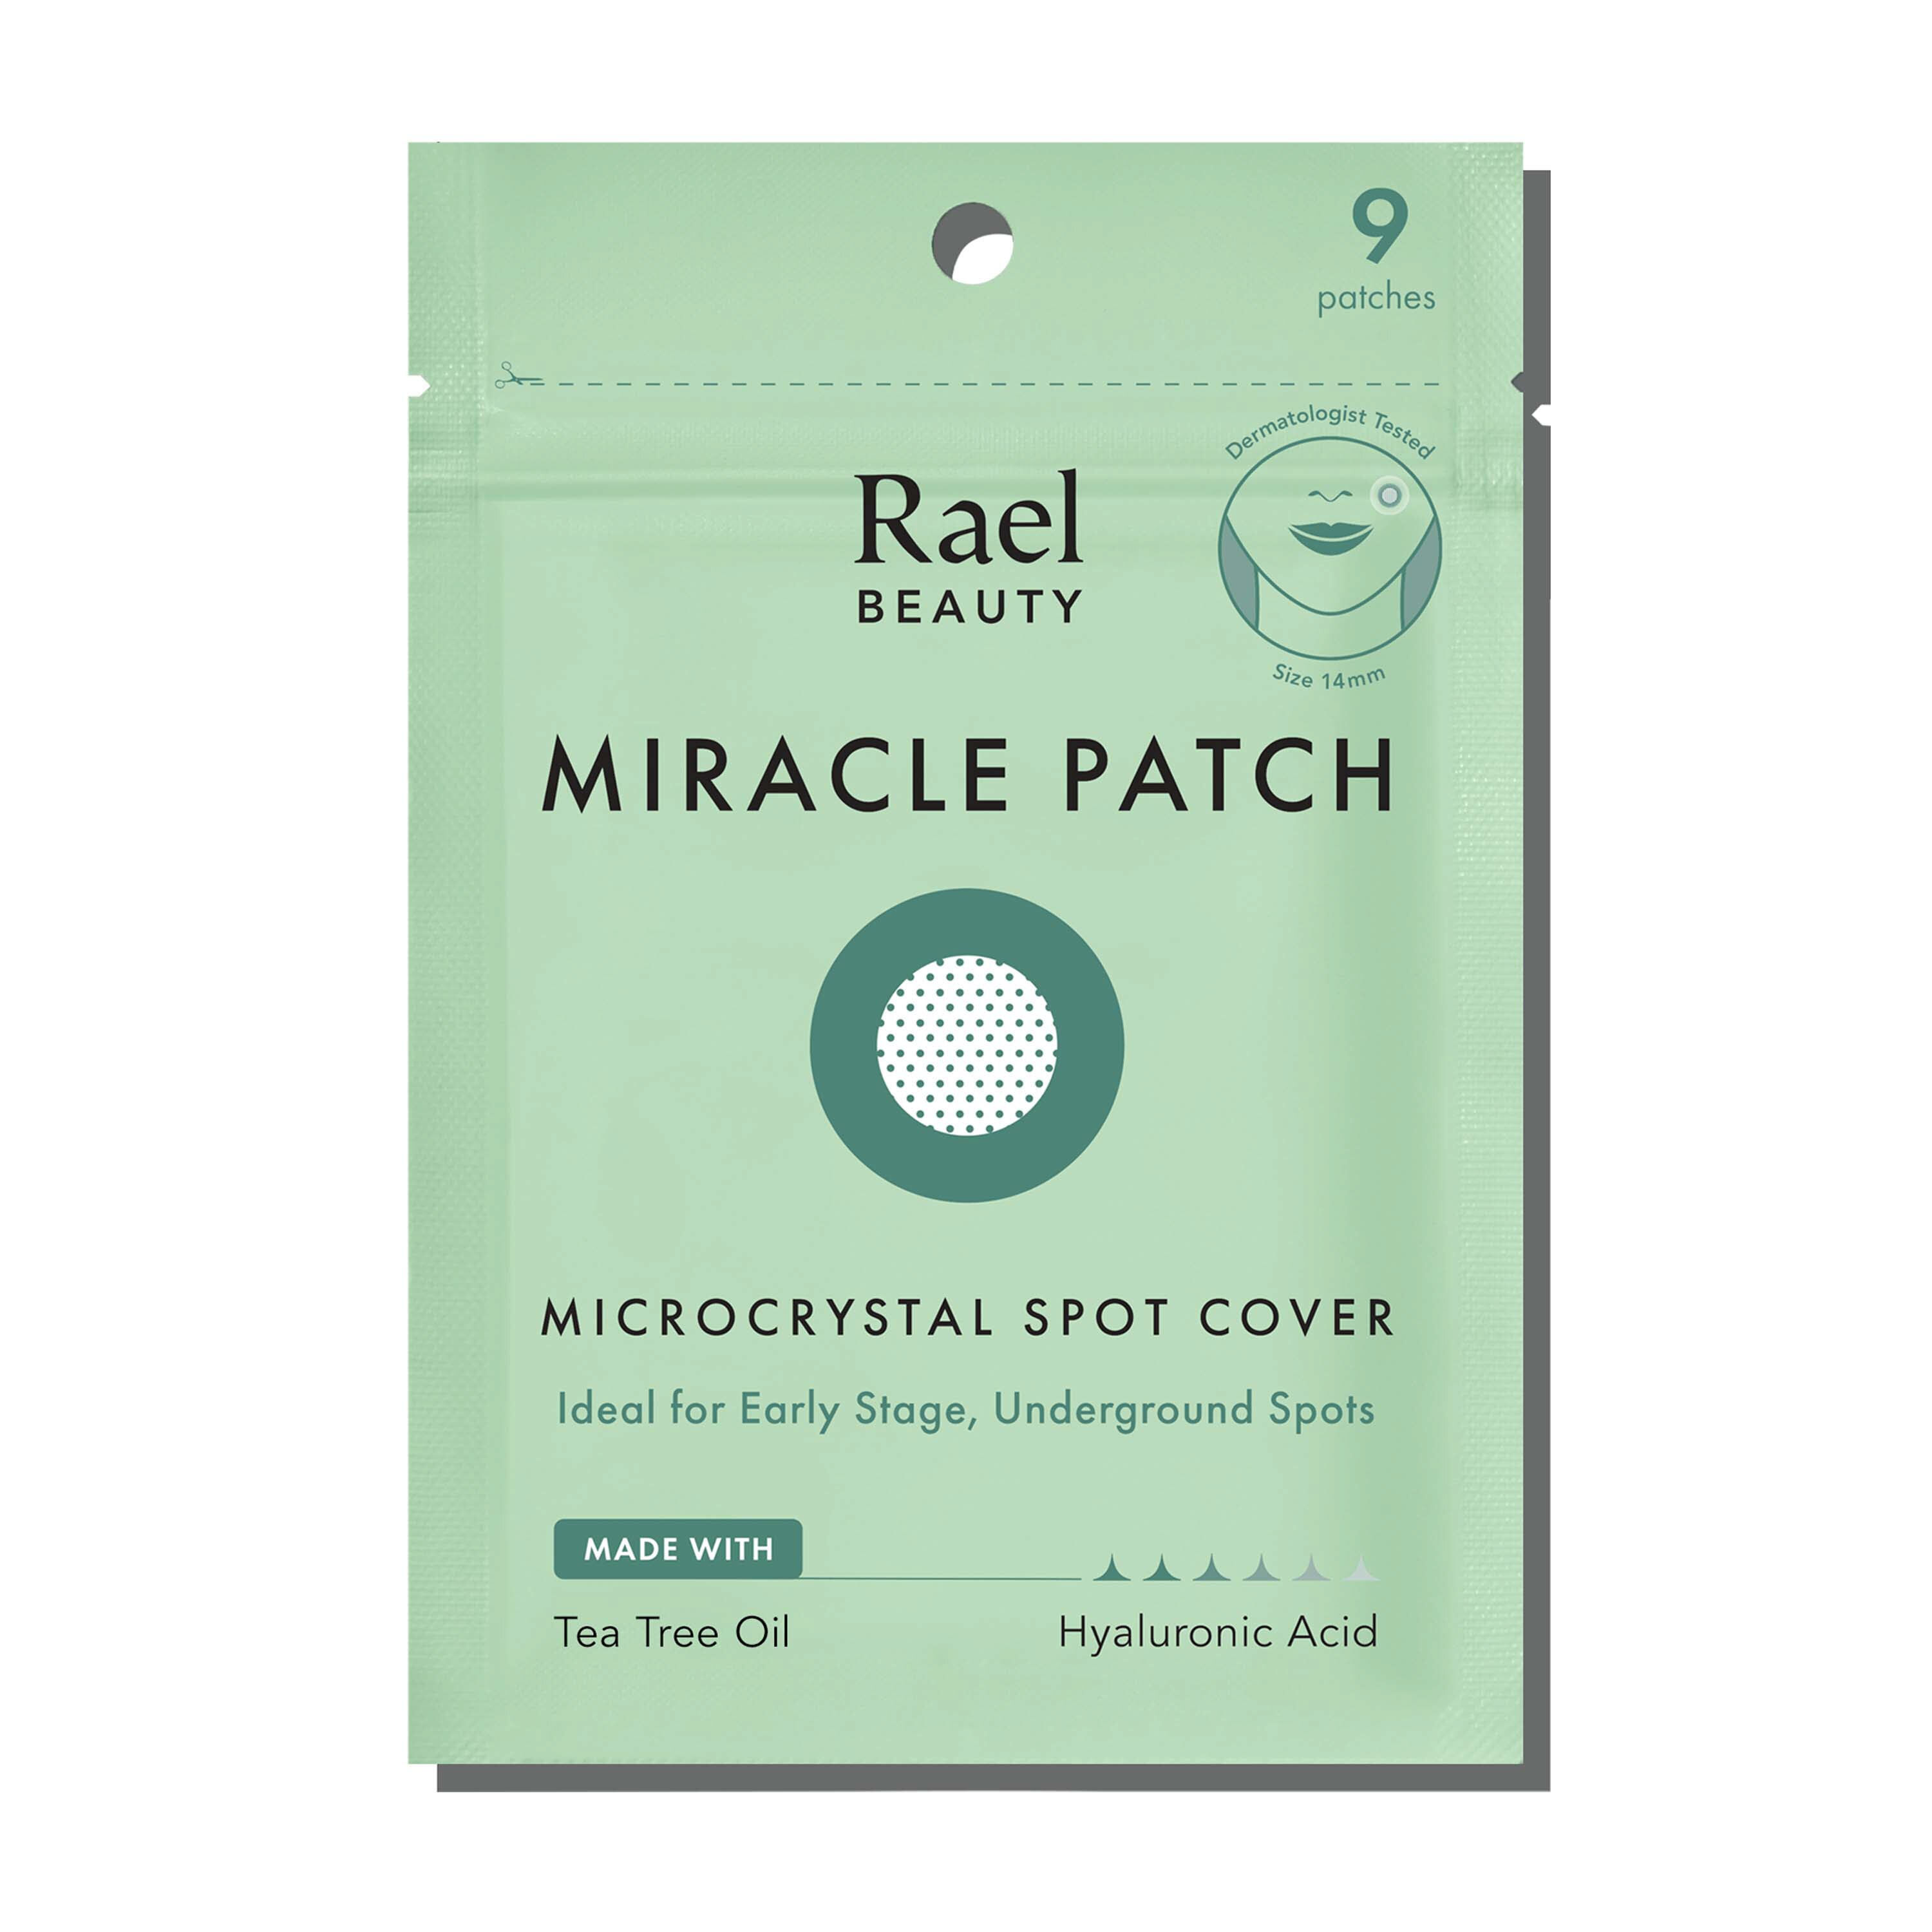 Rael Beauty Miracle Patch Microcrystal Spot Cover, 9CT